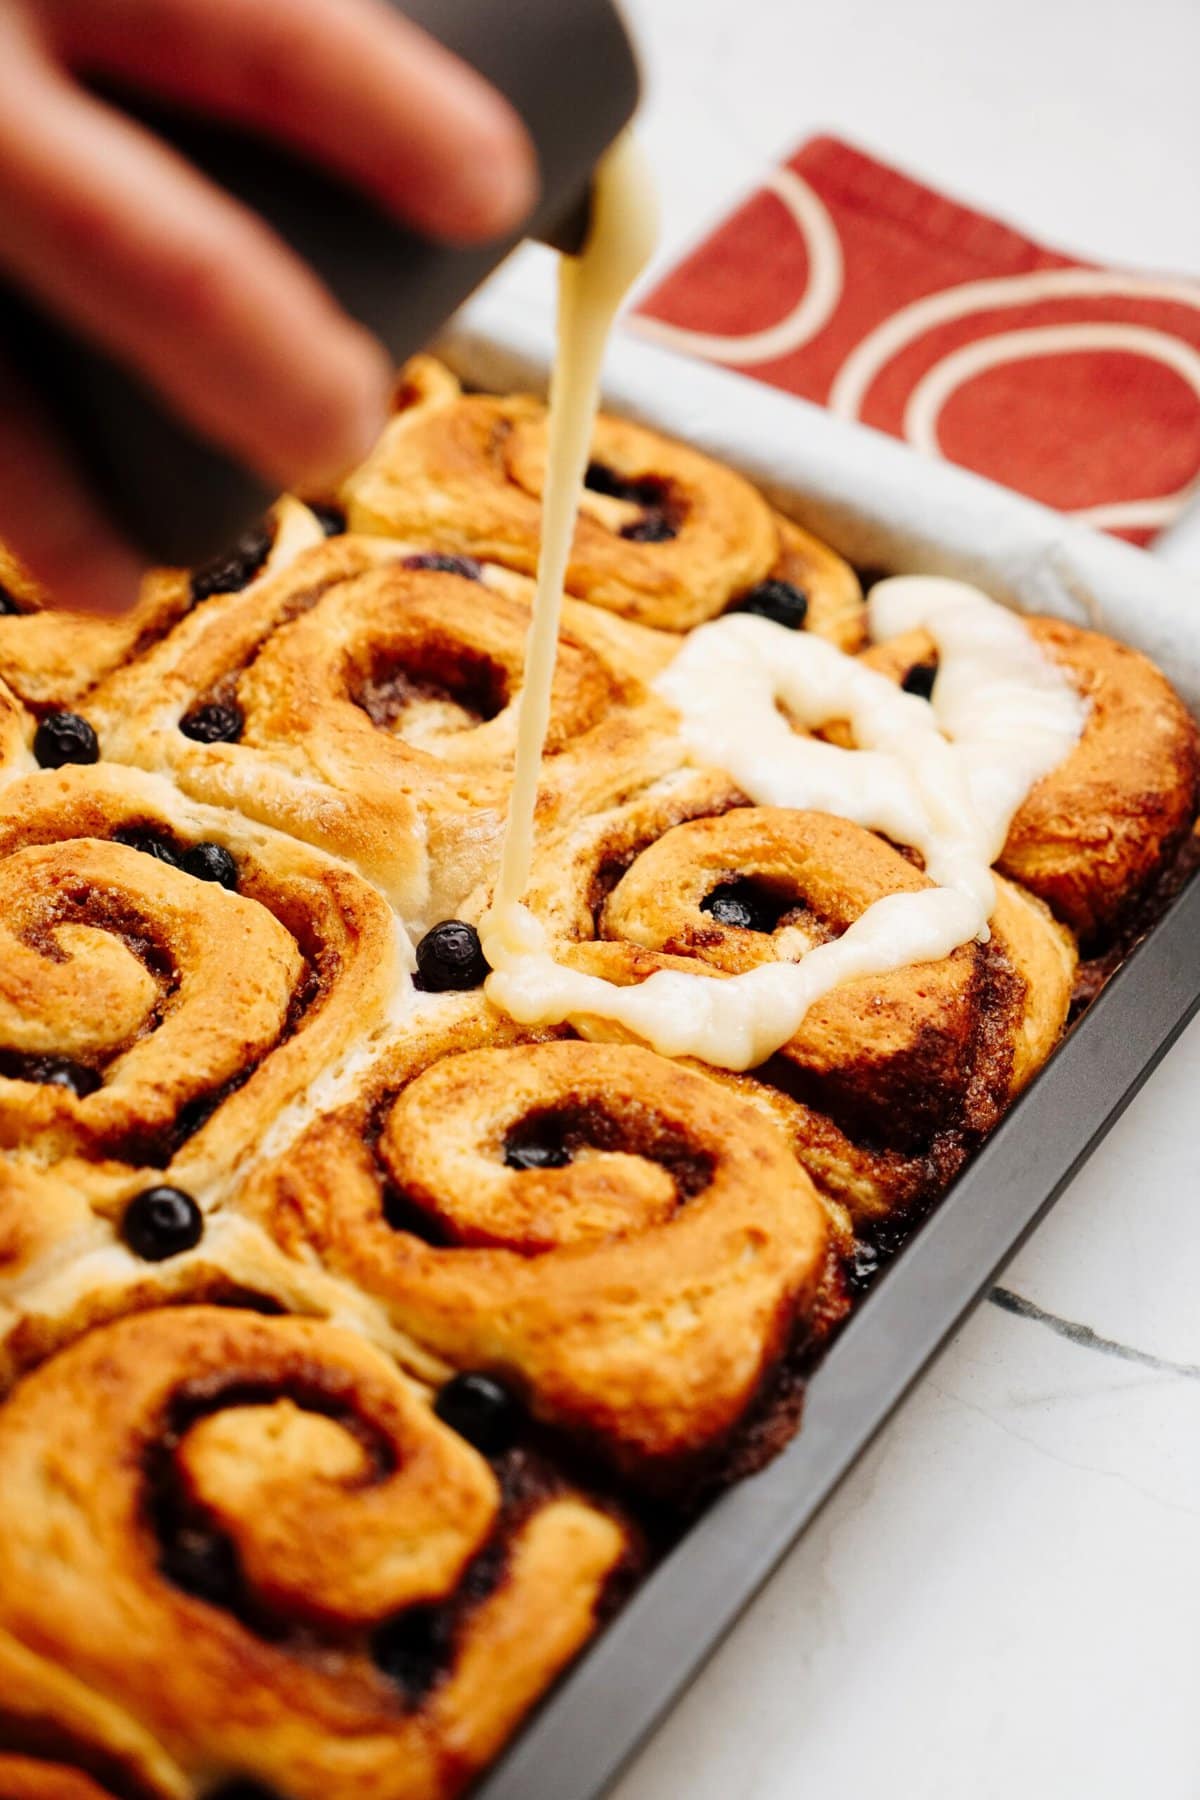 A hand is drizzling icing over a pan of freshly baked cinnamon rolls, filling the air with their sweet aroma.